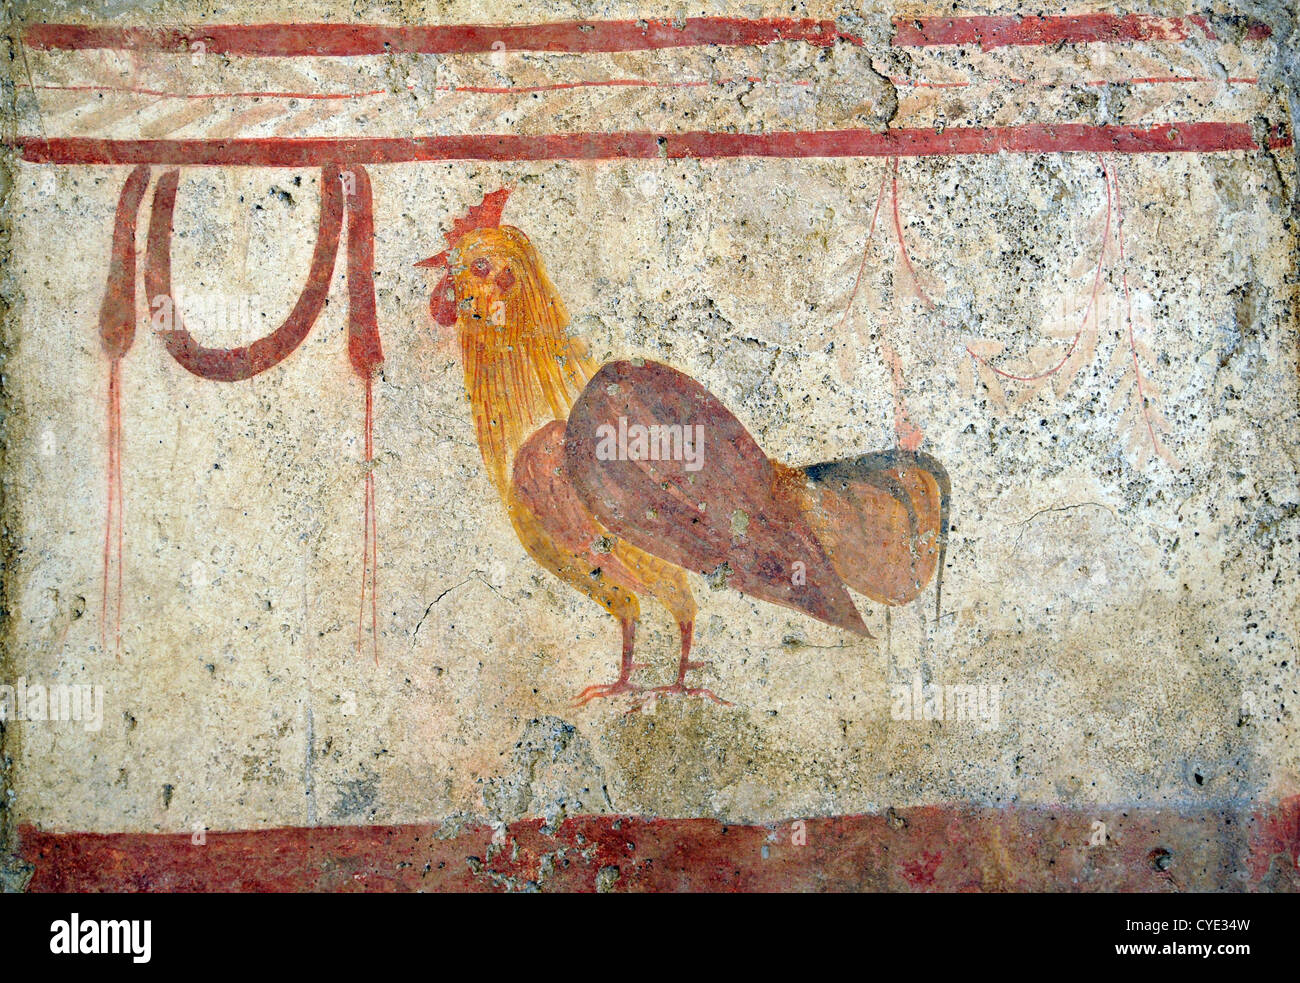 Rooster and Swag, Greek tomb slab c.350 BC, The museum at Paestum, site of Greek and Roman remains, Italy Stock Photo